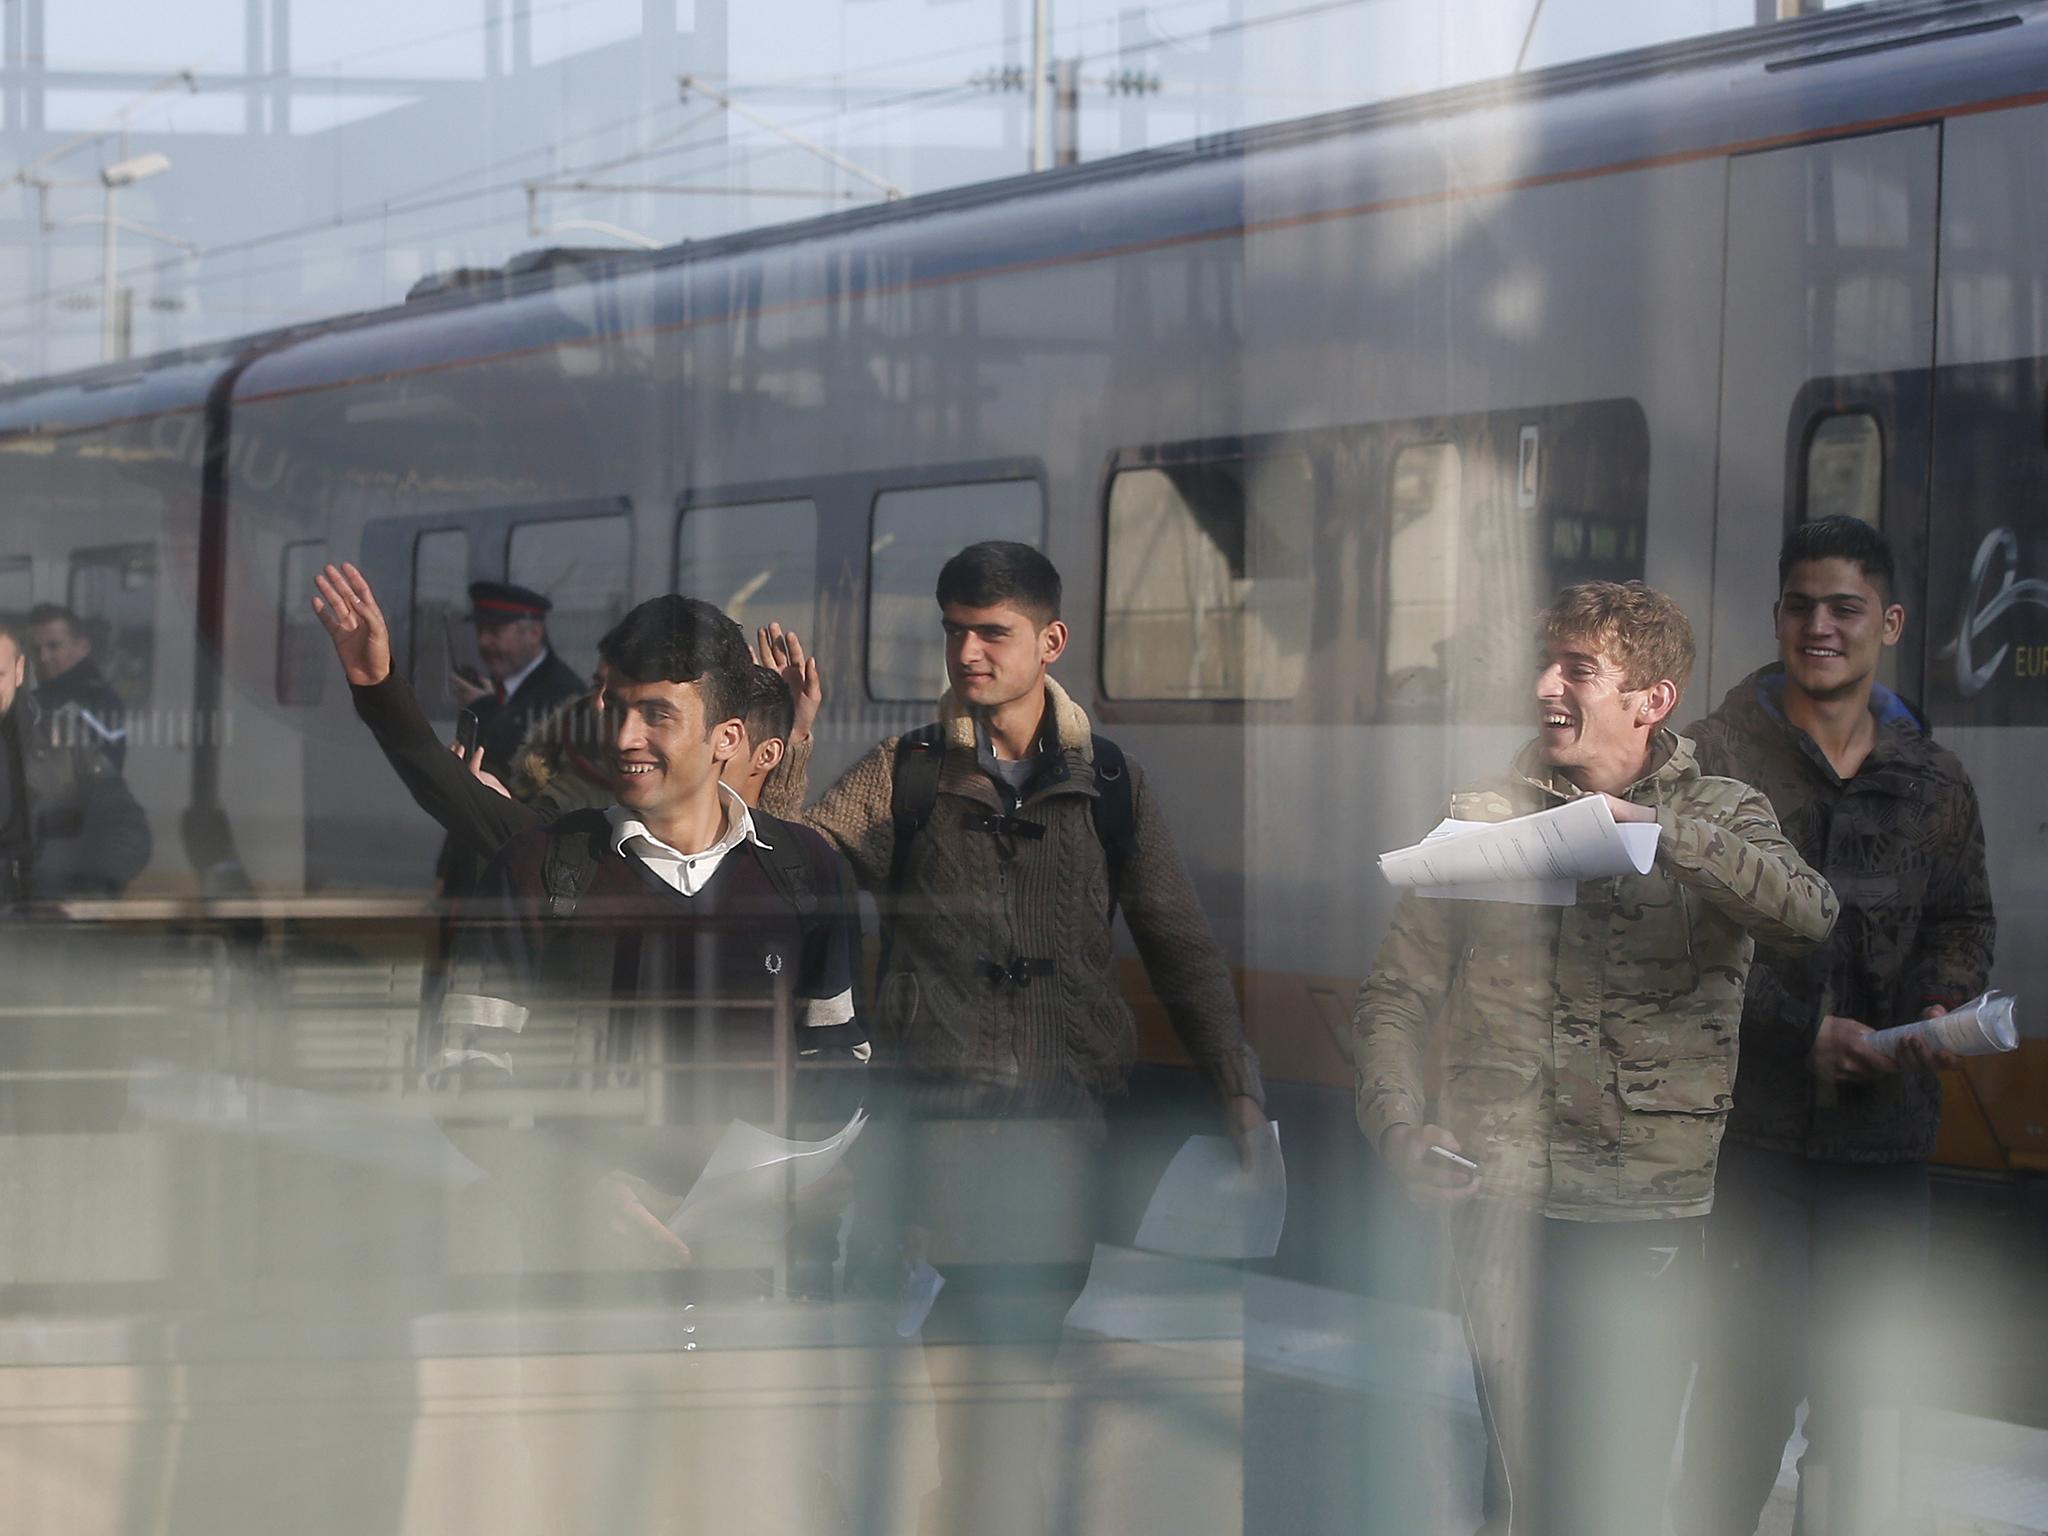 One Syrian and five Afghan boys wave on the platform of the Calais train station, northern France, as they leave for Britain on Thursday